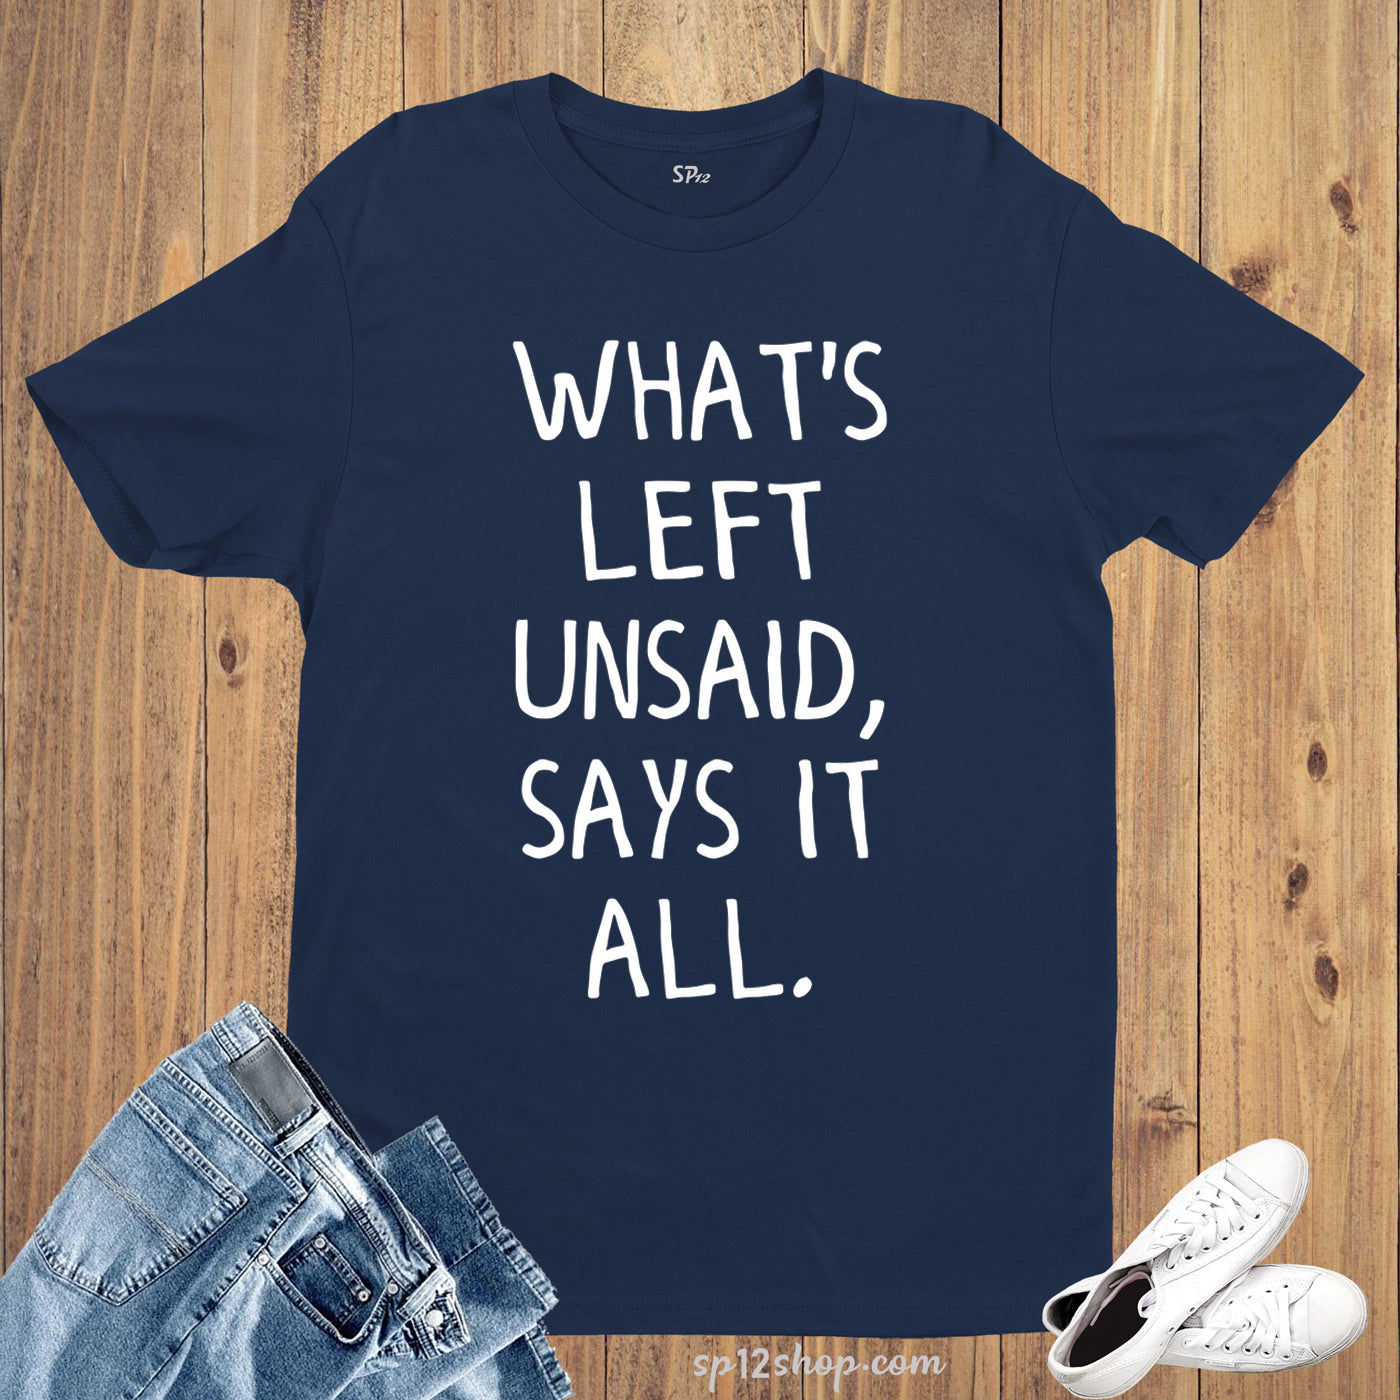 Gym Fitness T Shirt Left Unsaid Says All Witty Quote Clever